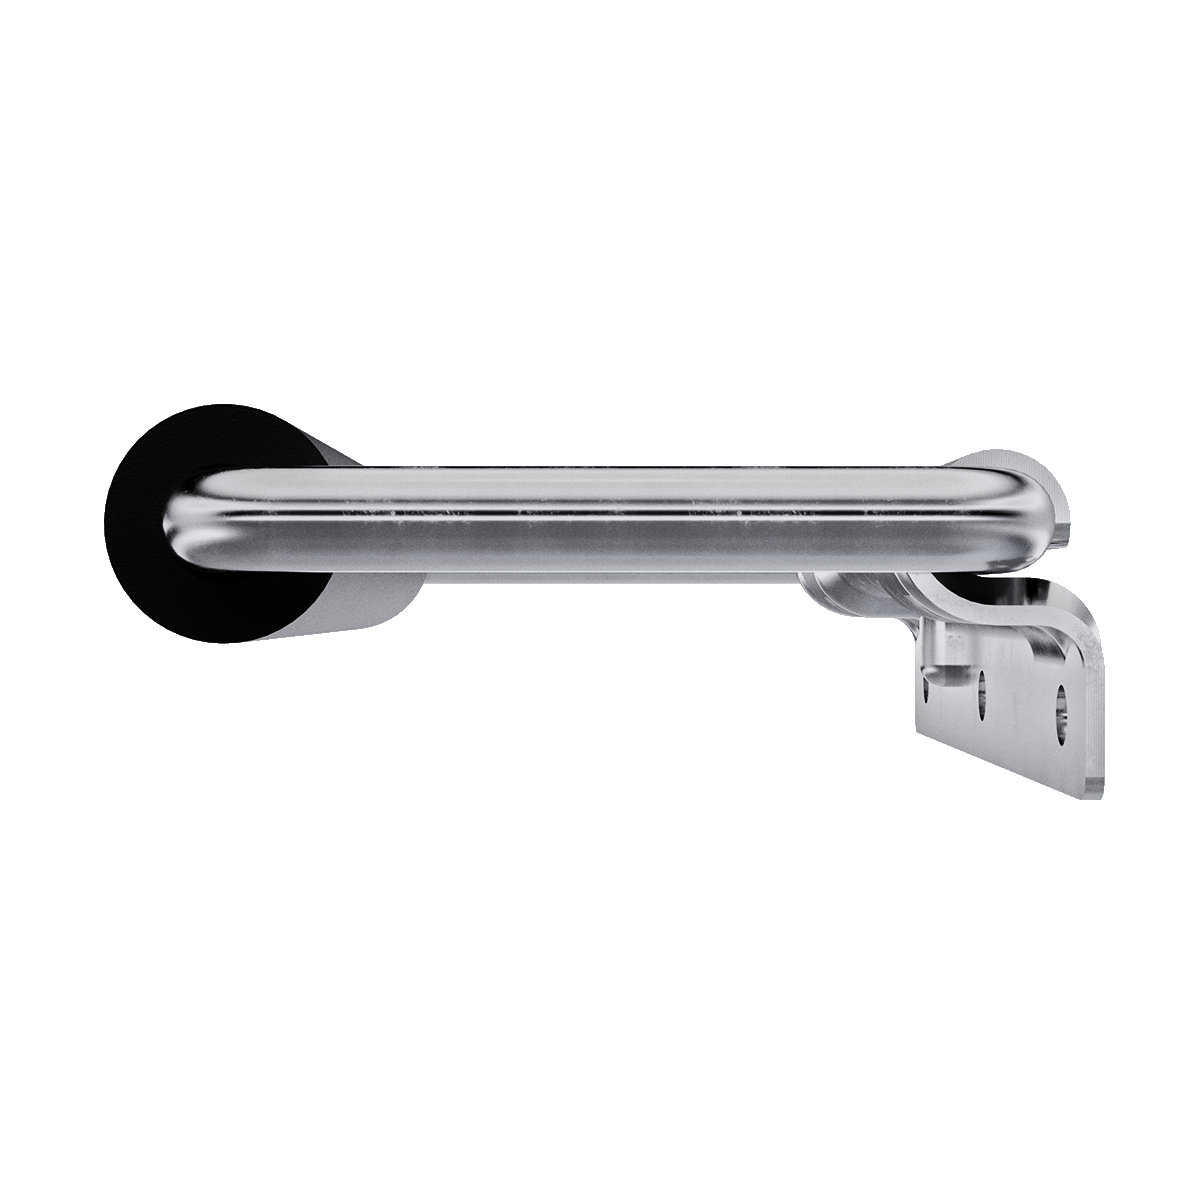 Medium surface mount handle with wire bail up, side view